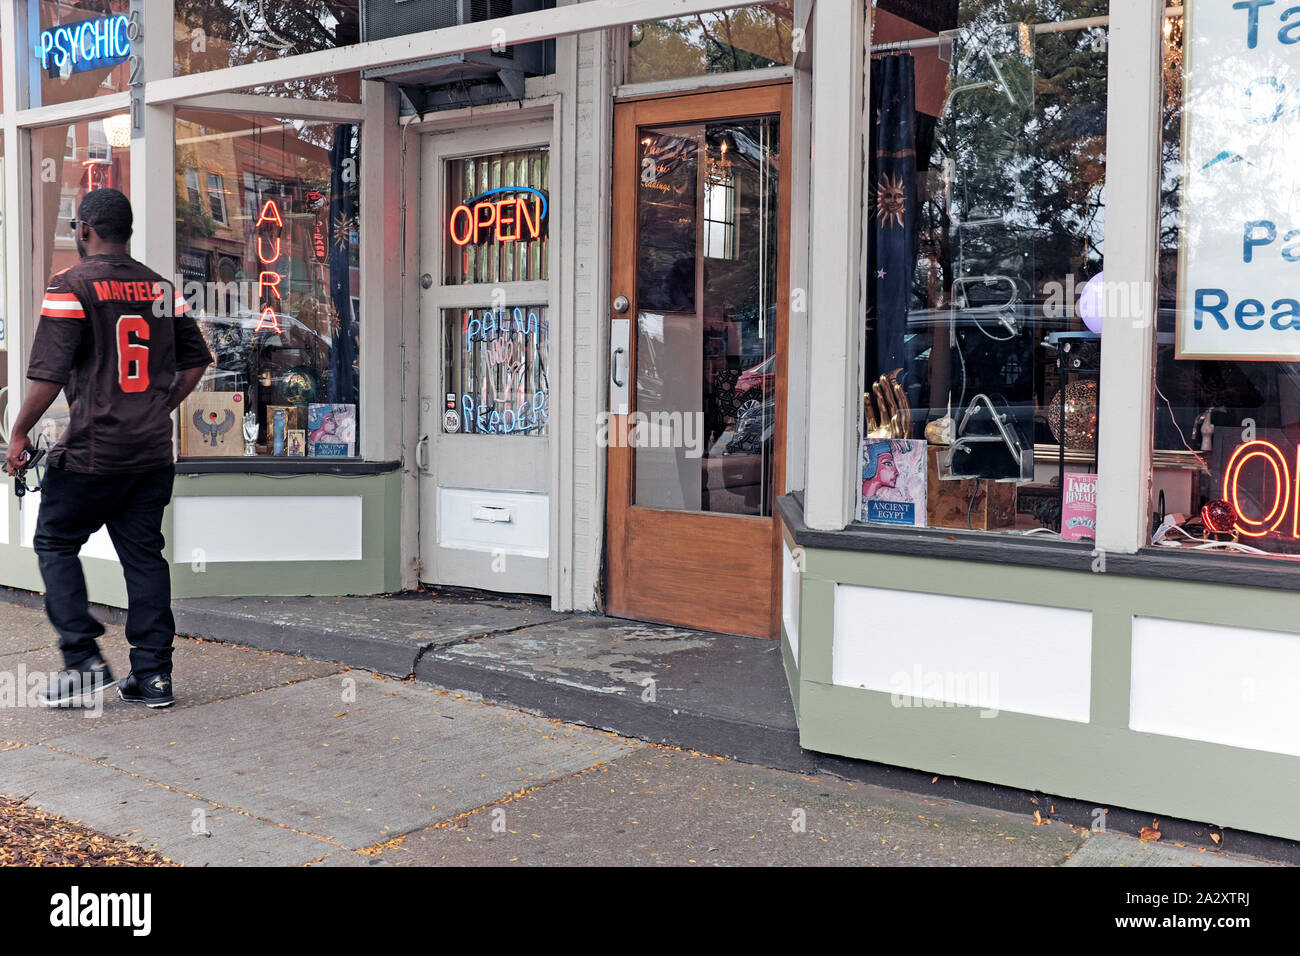 A Browns Football fan with a Mayfield jersy on walks past a psychic shop in downtown Cleveland, Ohio, USA. Stock Photo